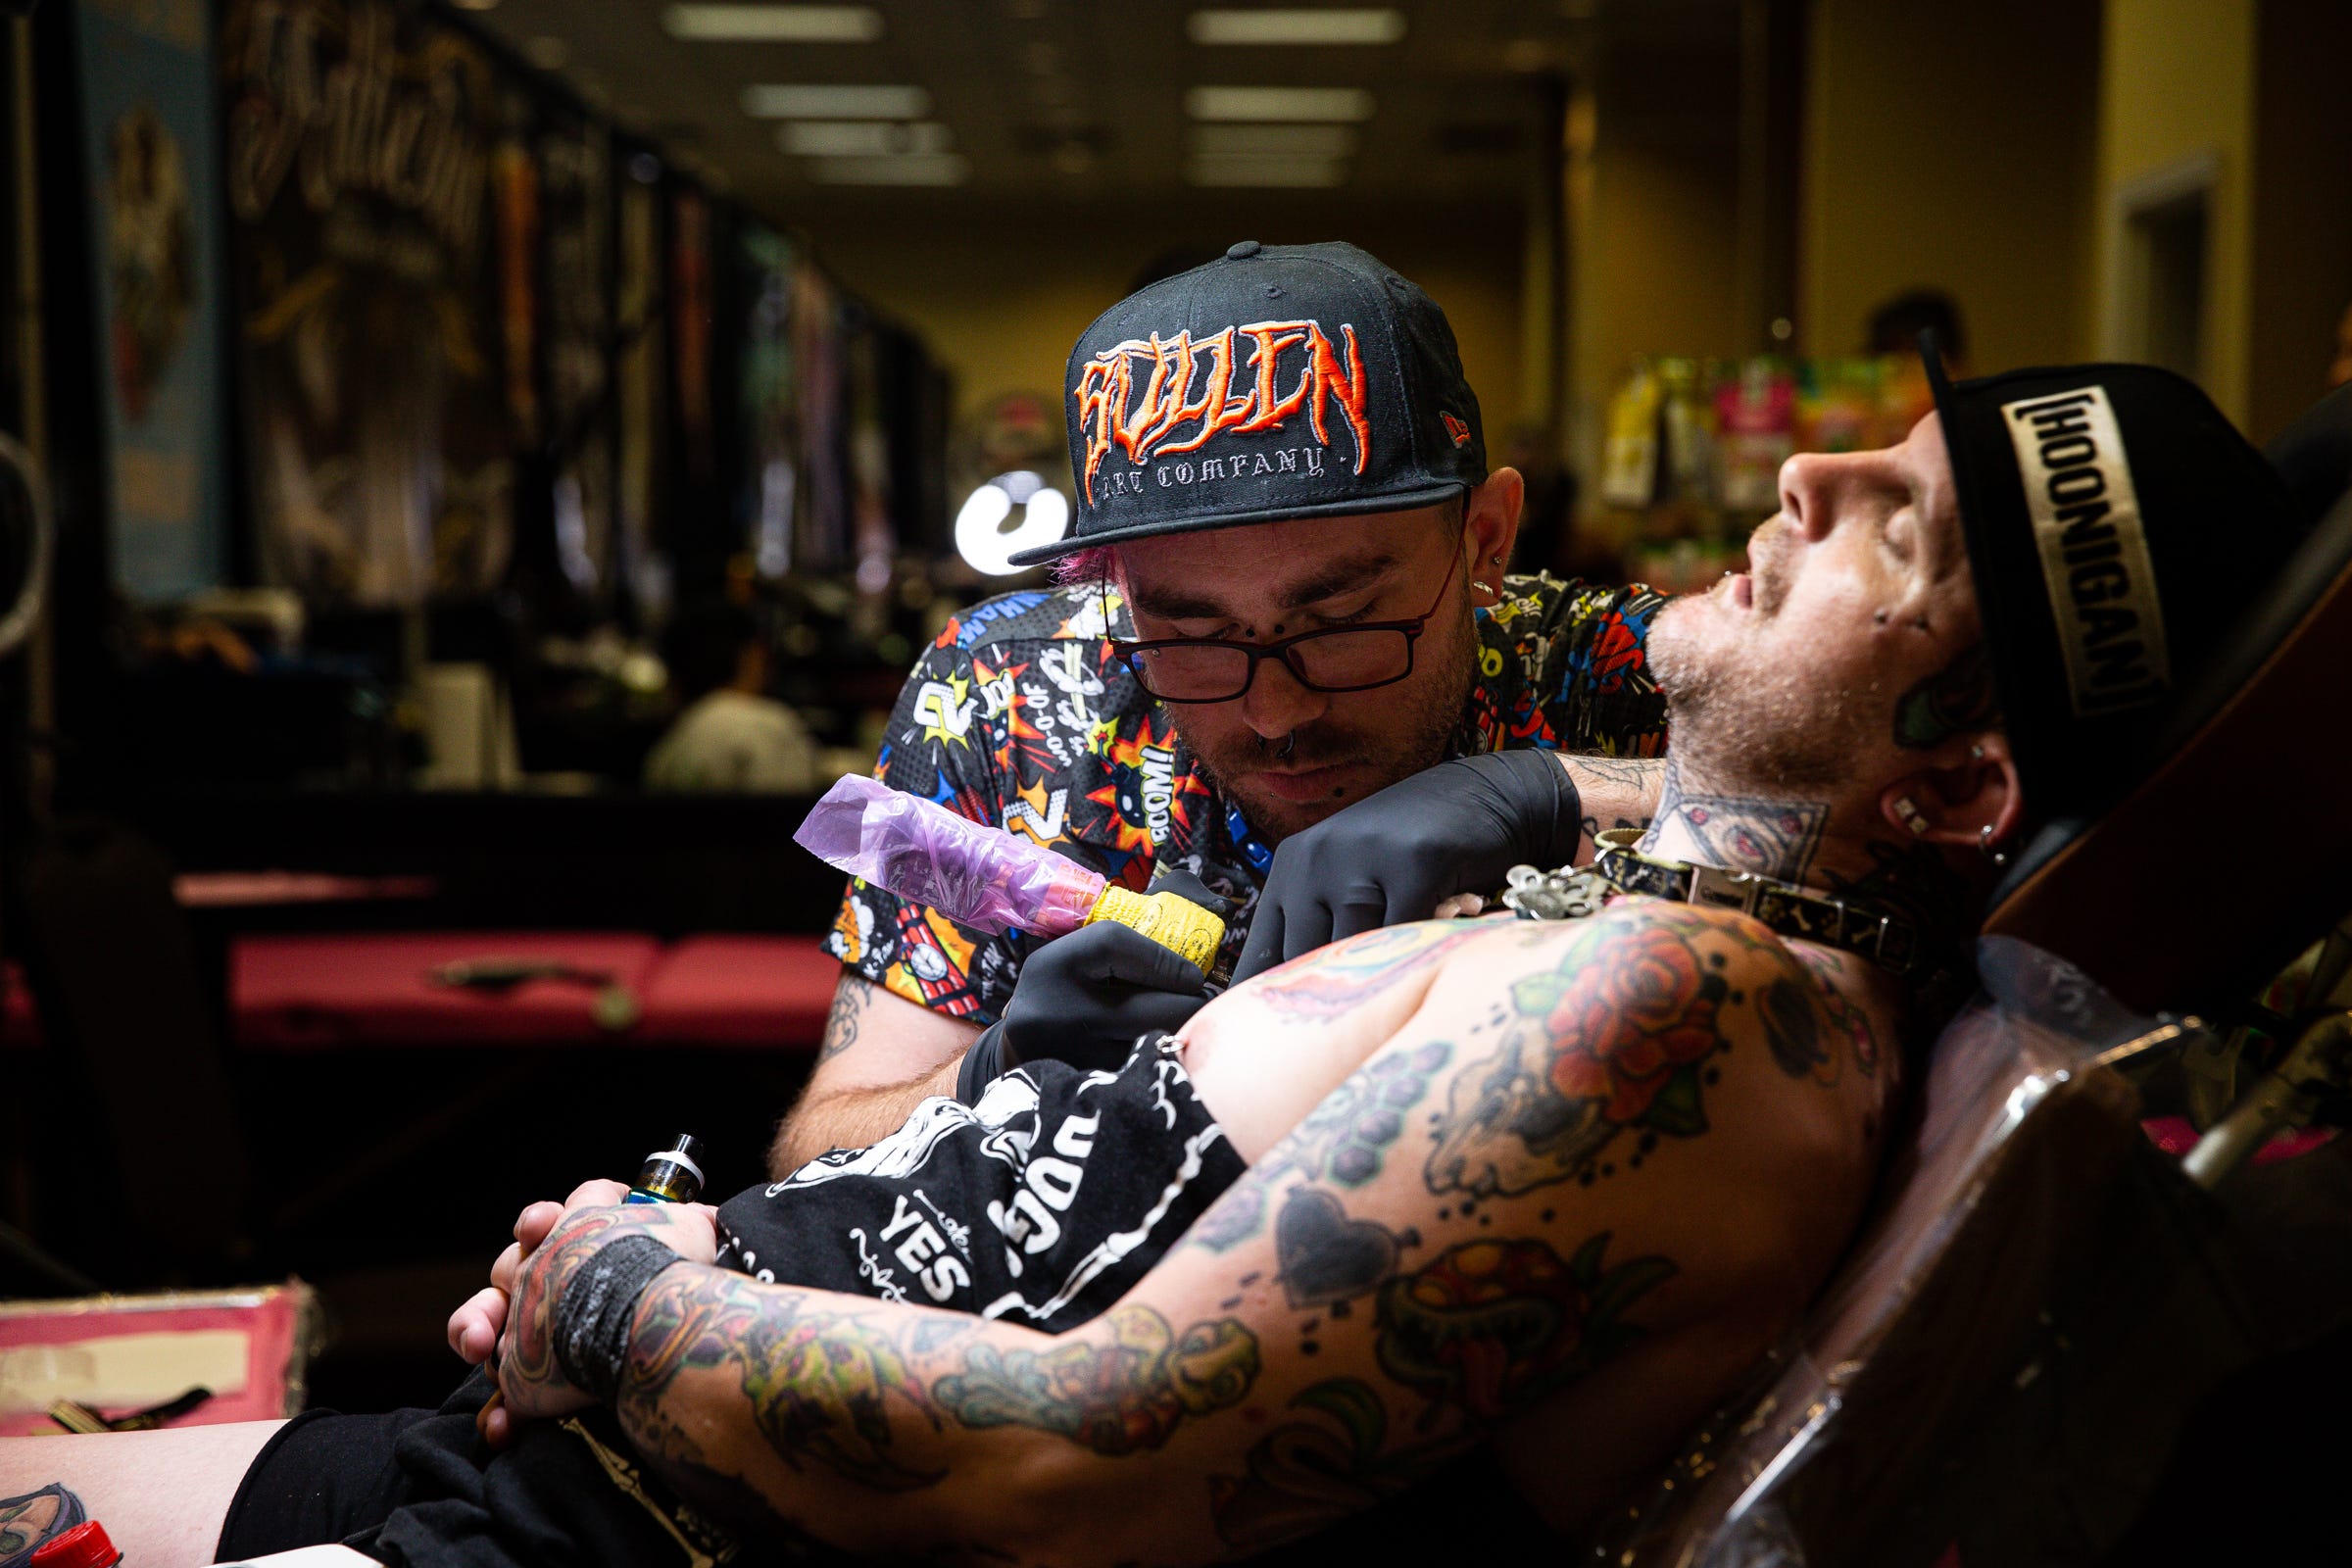 Star of Texas Tattoo Art Festival in Austin at Palmer Events